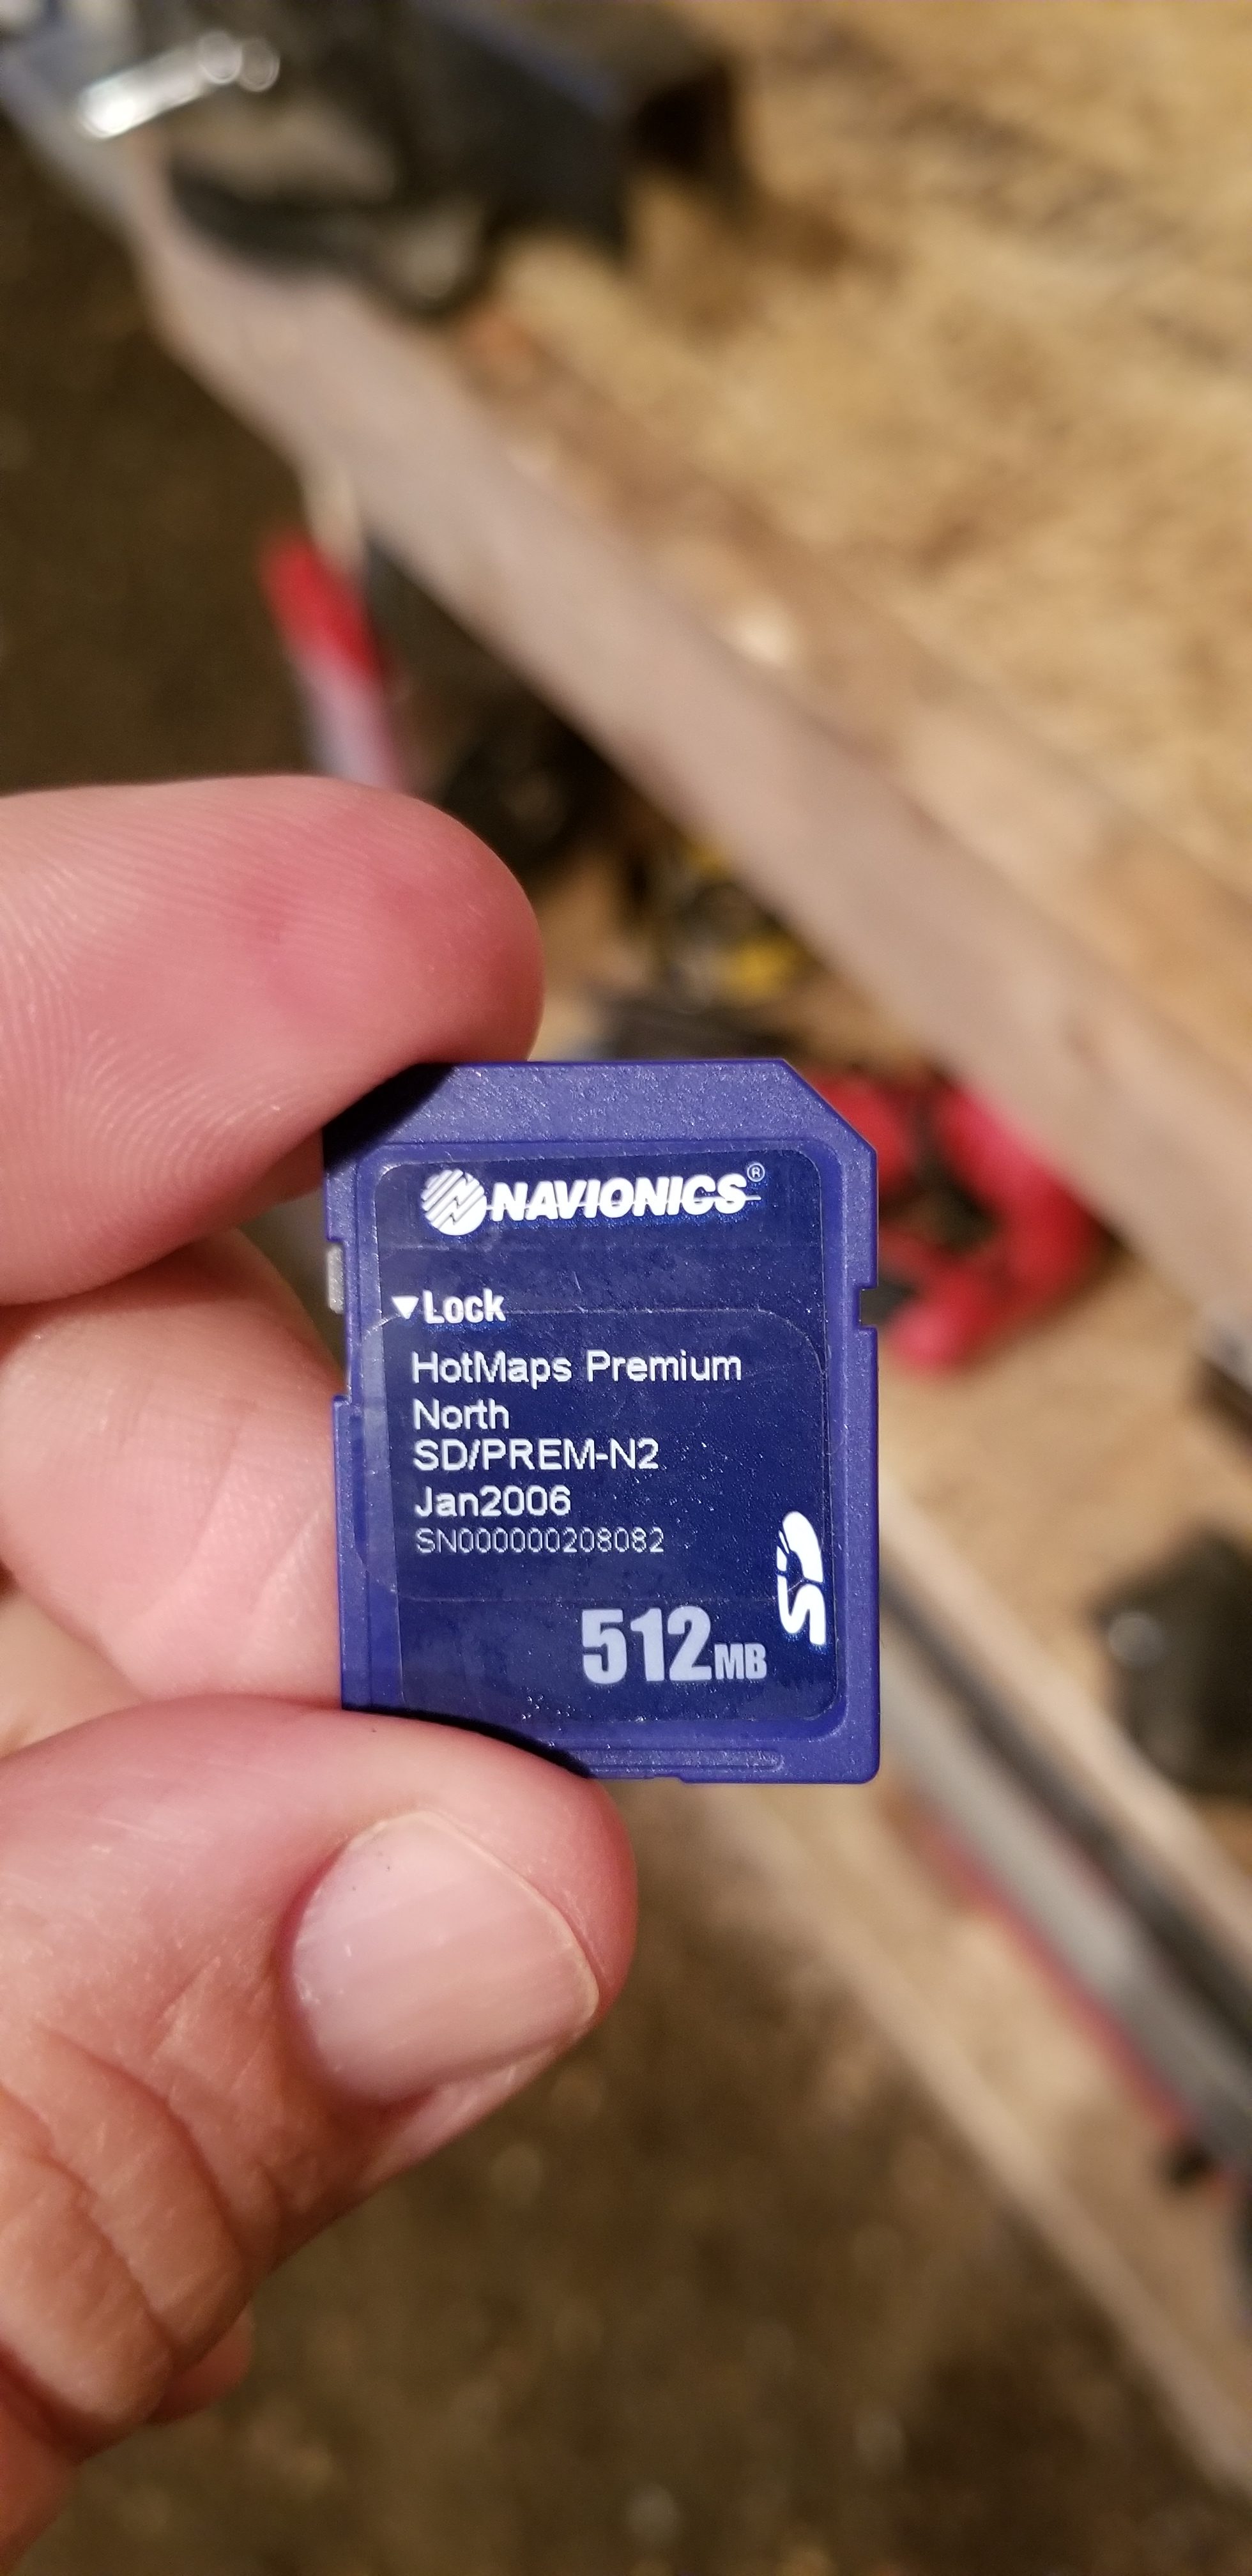 Wtb chip for lowrance elite 5hdi. - Classified Ads | In-Depth Outdoors